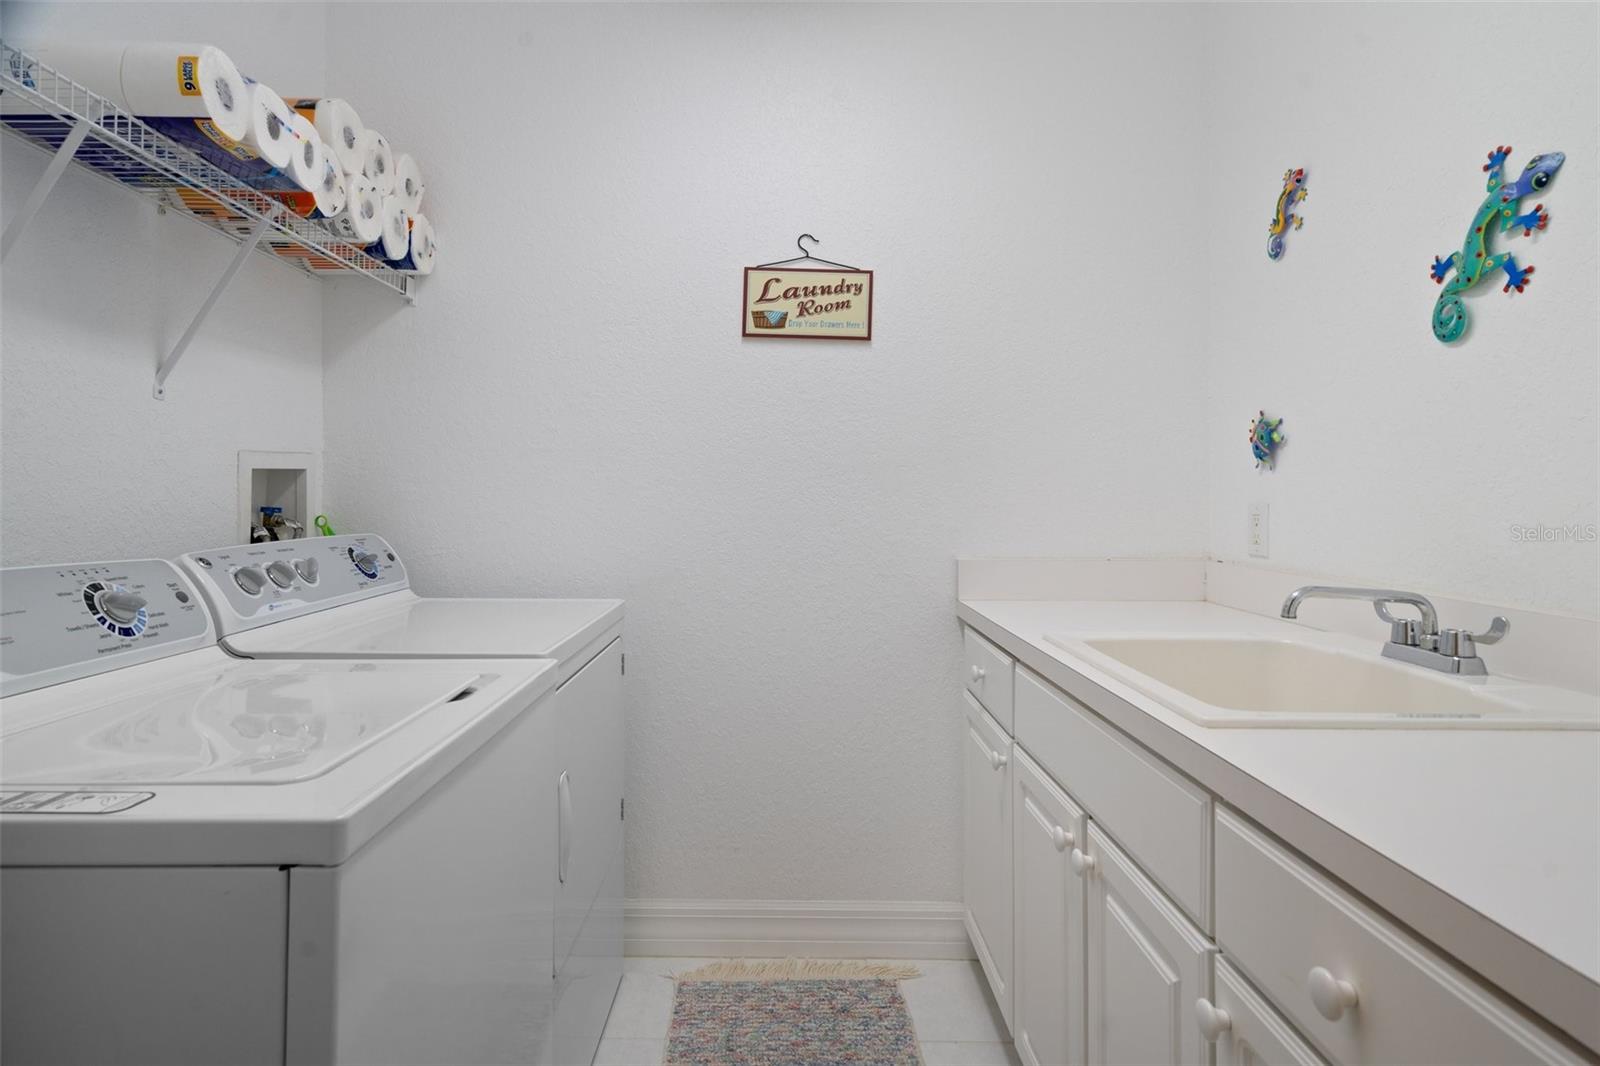 3rd level laundry room